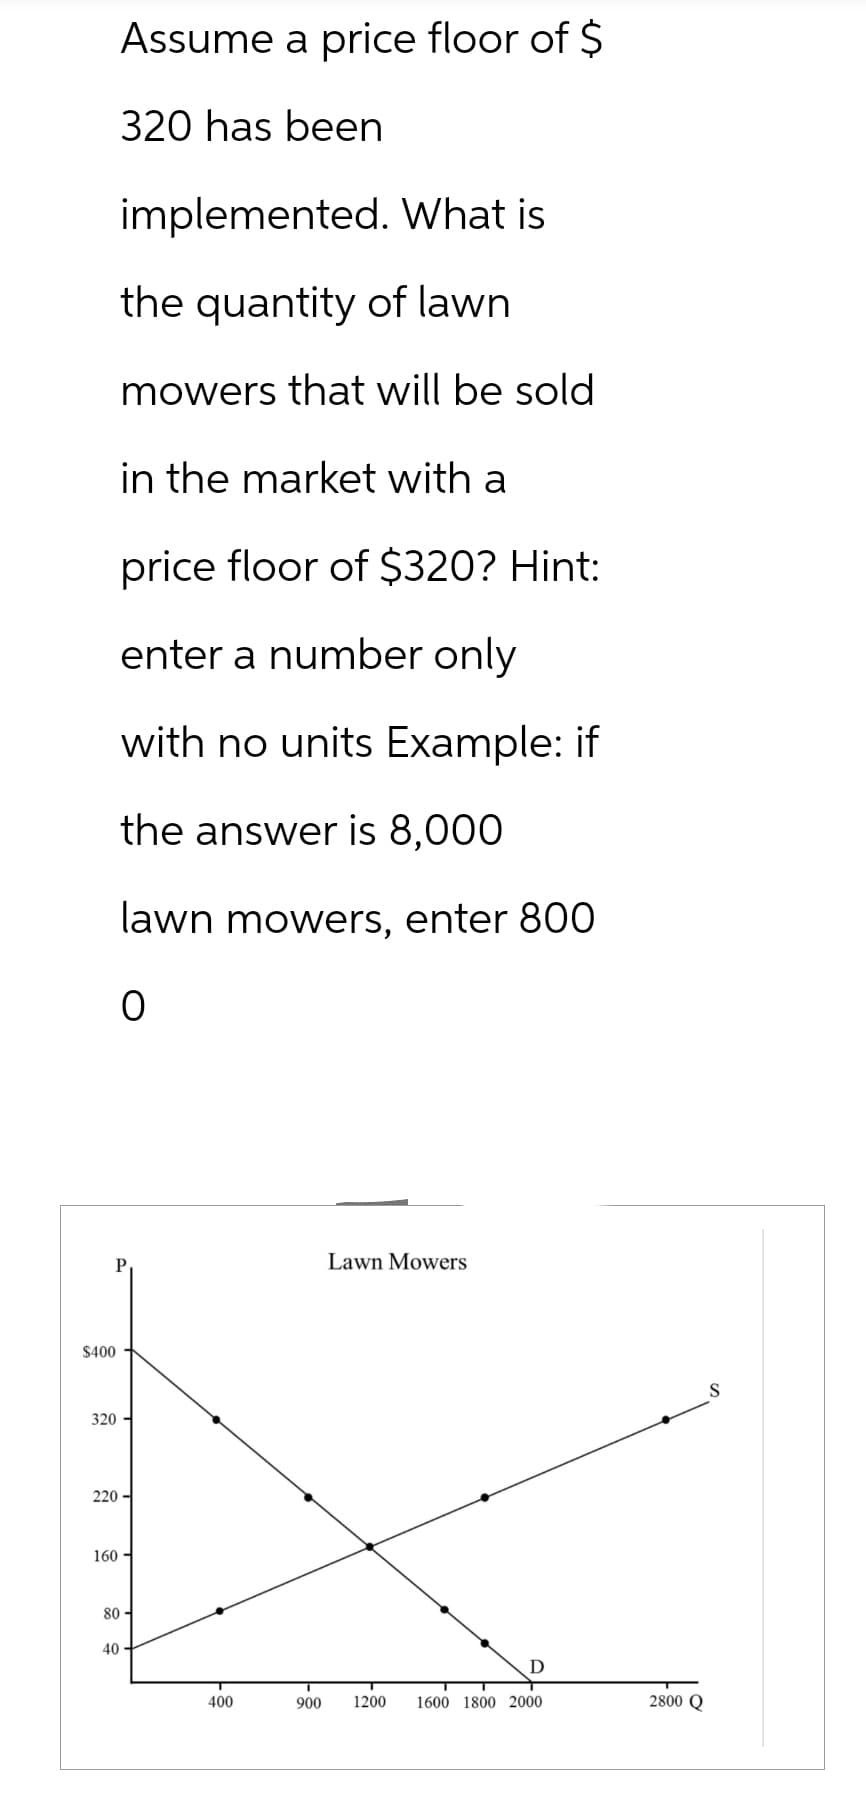 $400
Assume
320 has been
implemented. What is
the quantity of lawn
mowers that will be sold
in the market with a
price floor of $320? Hint:
enter a number only
with no units Example: if
the answer is 8,000
lawn mowers, enter 800
O
320-
220-
160-
80-
40-
a price floor of $
400
Lawn Mowers
D
900 1200 1600 1800 2000
2800 Q
S